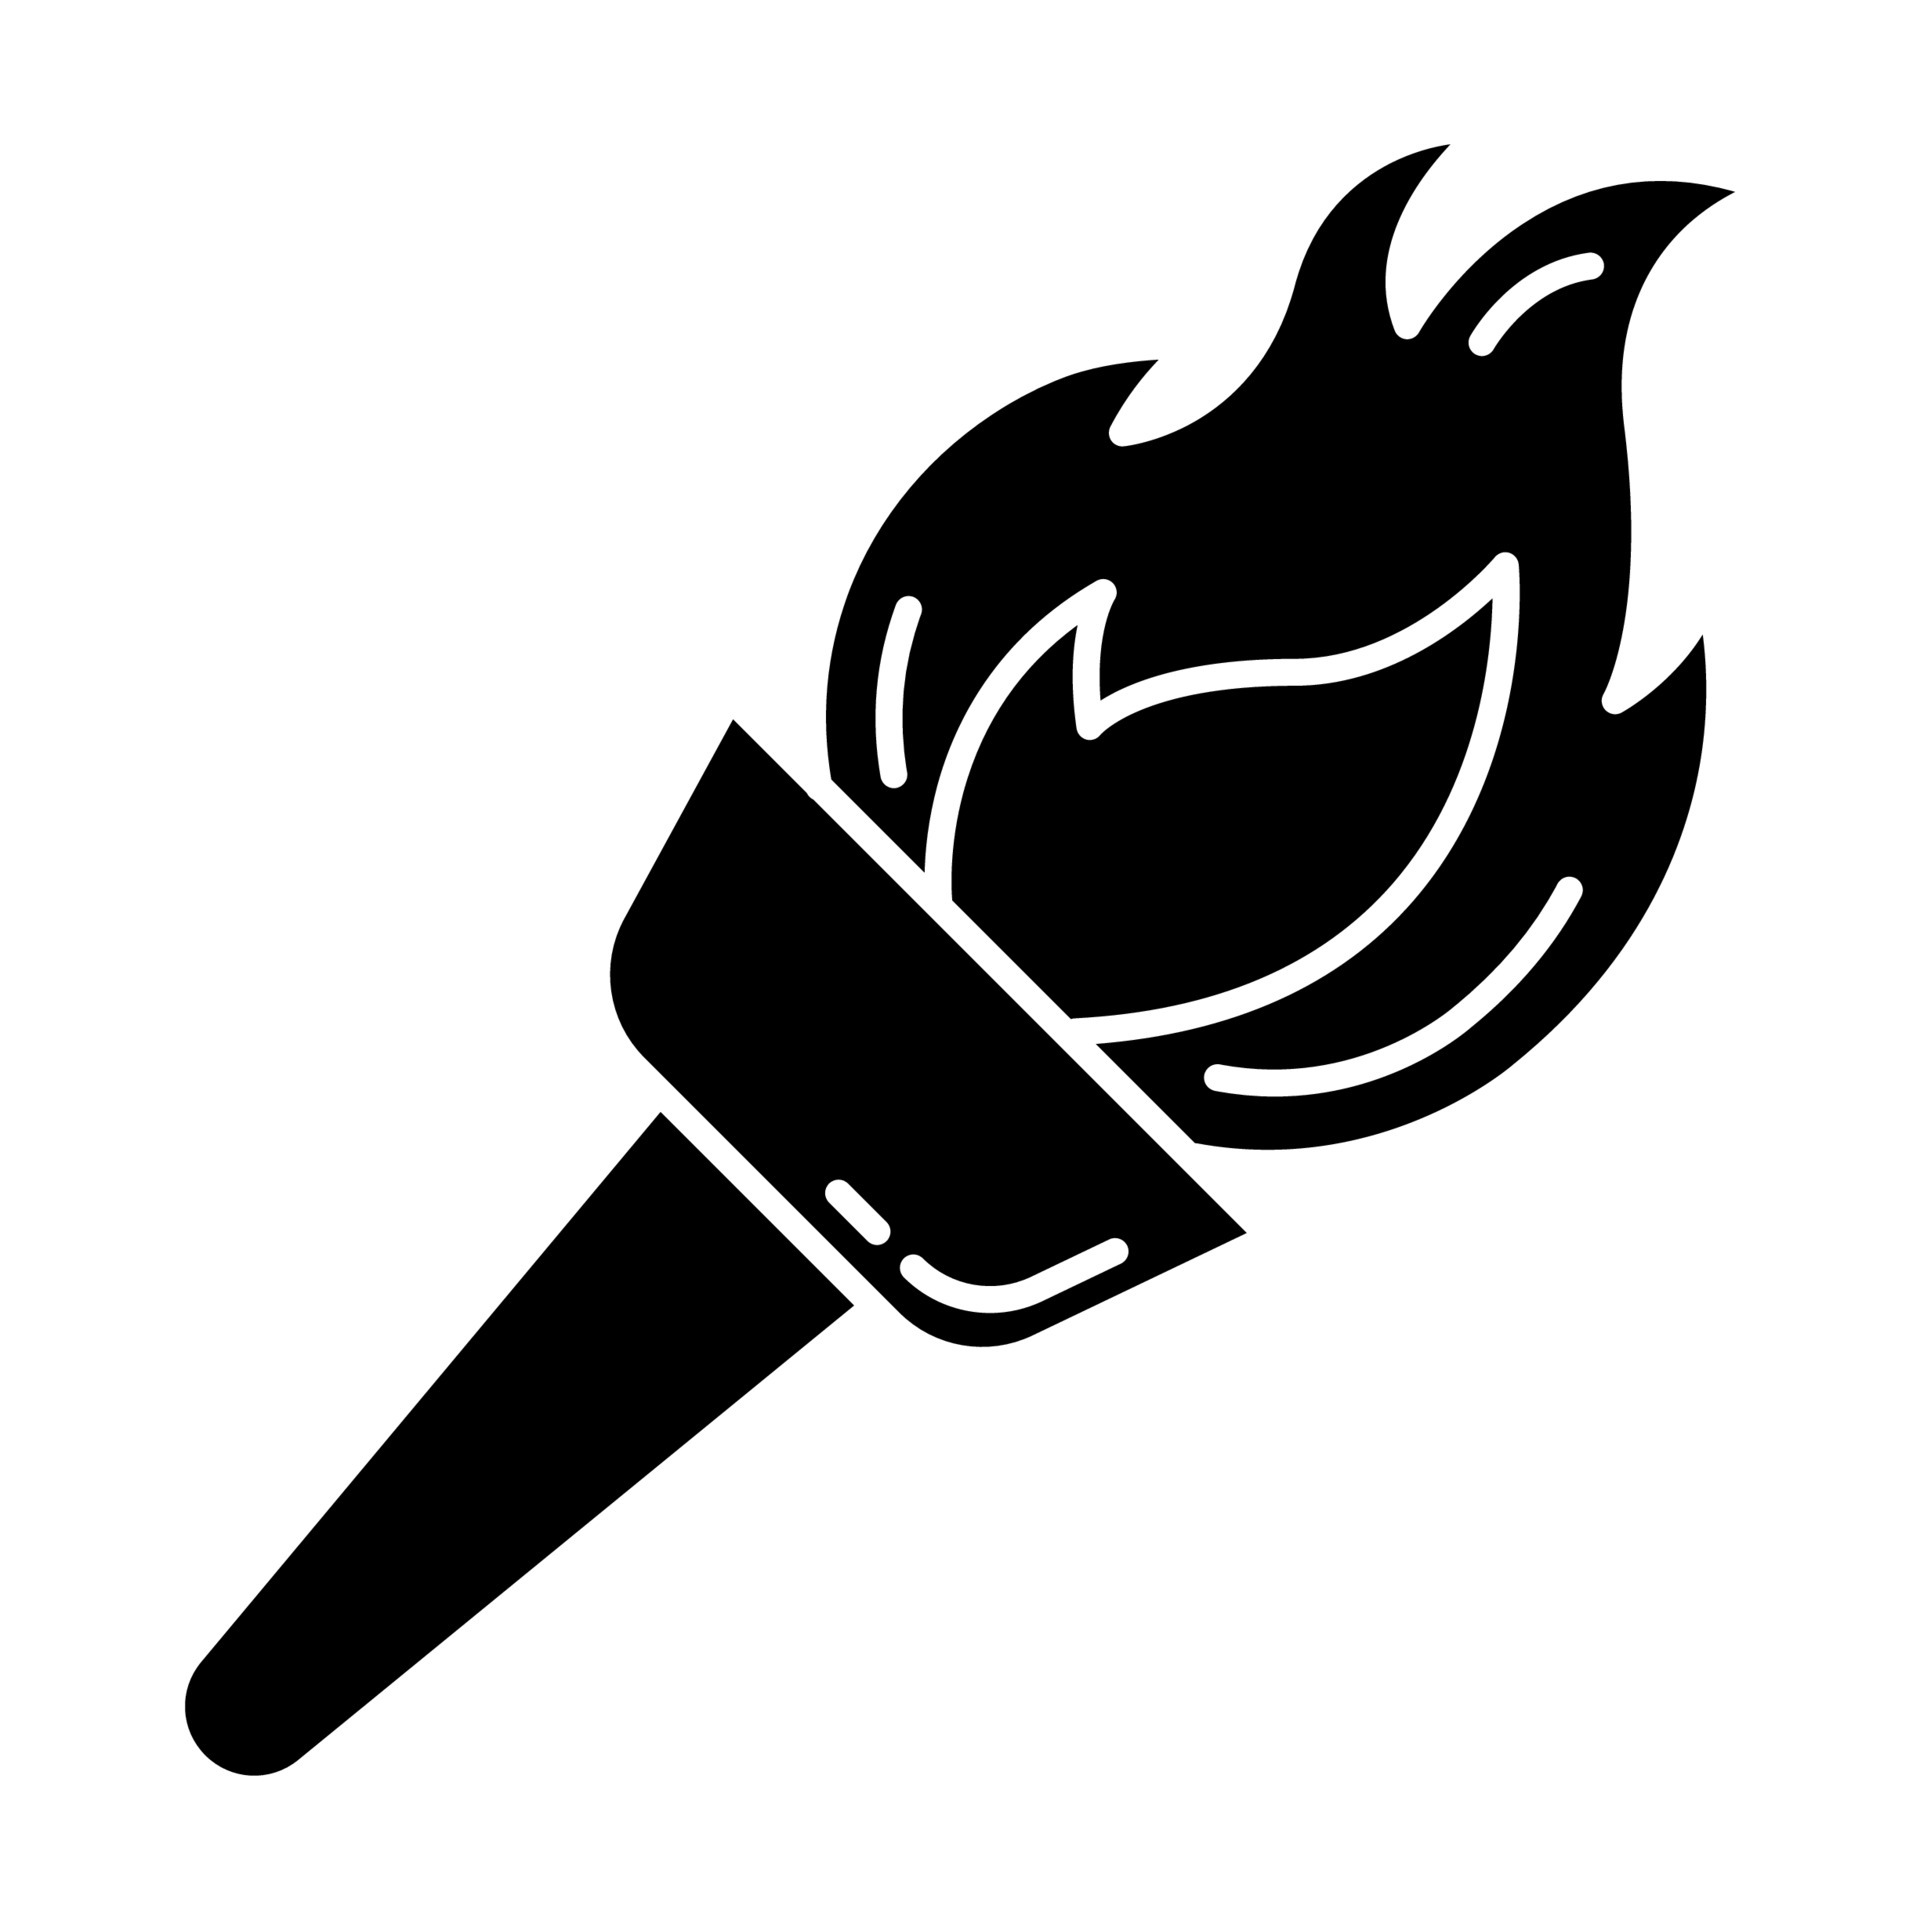 https://static.vecteezy.com/system/resources/previews/004/616/850/original/medieval-torch-glyph-icon-flambeau-burning-fire-bright-beacon-flare-bonfire-ancient-olympic-sport-victory-historical-discovery-silhouette-symbol-negative-space-isolated-illustration-vector.jpg